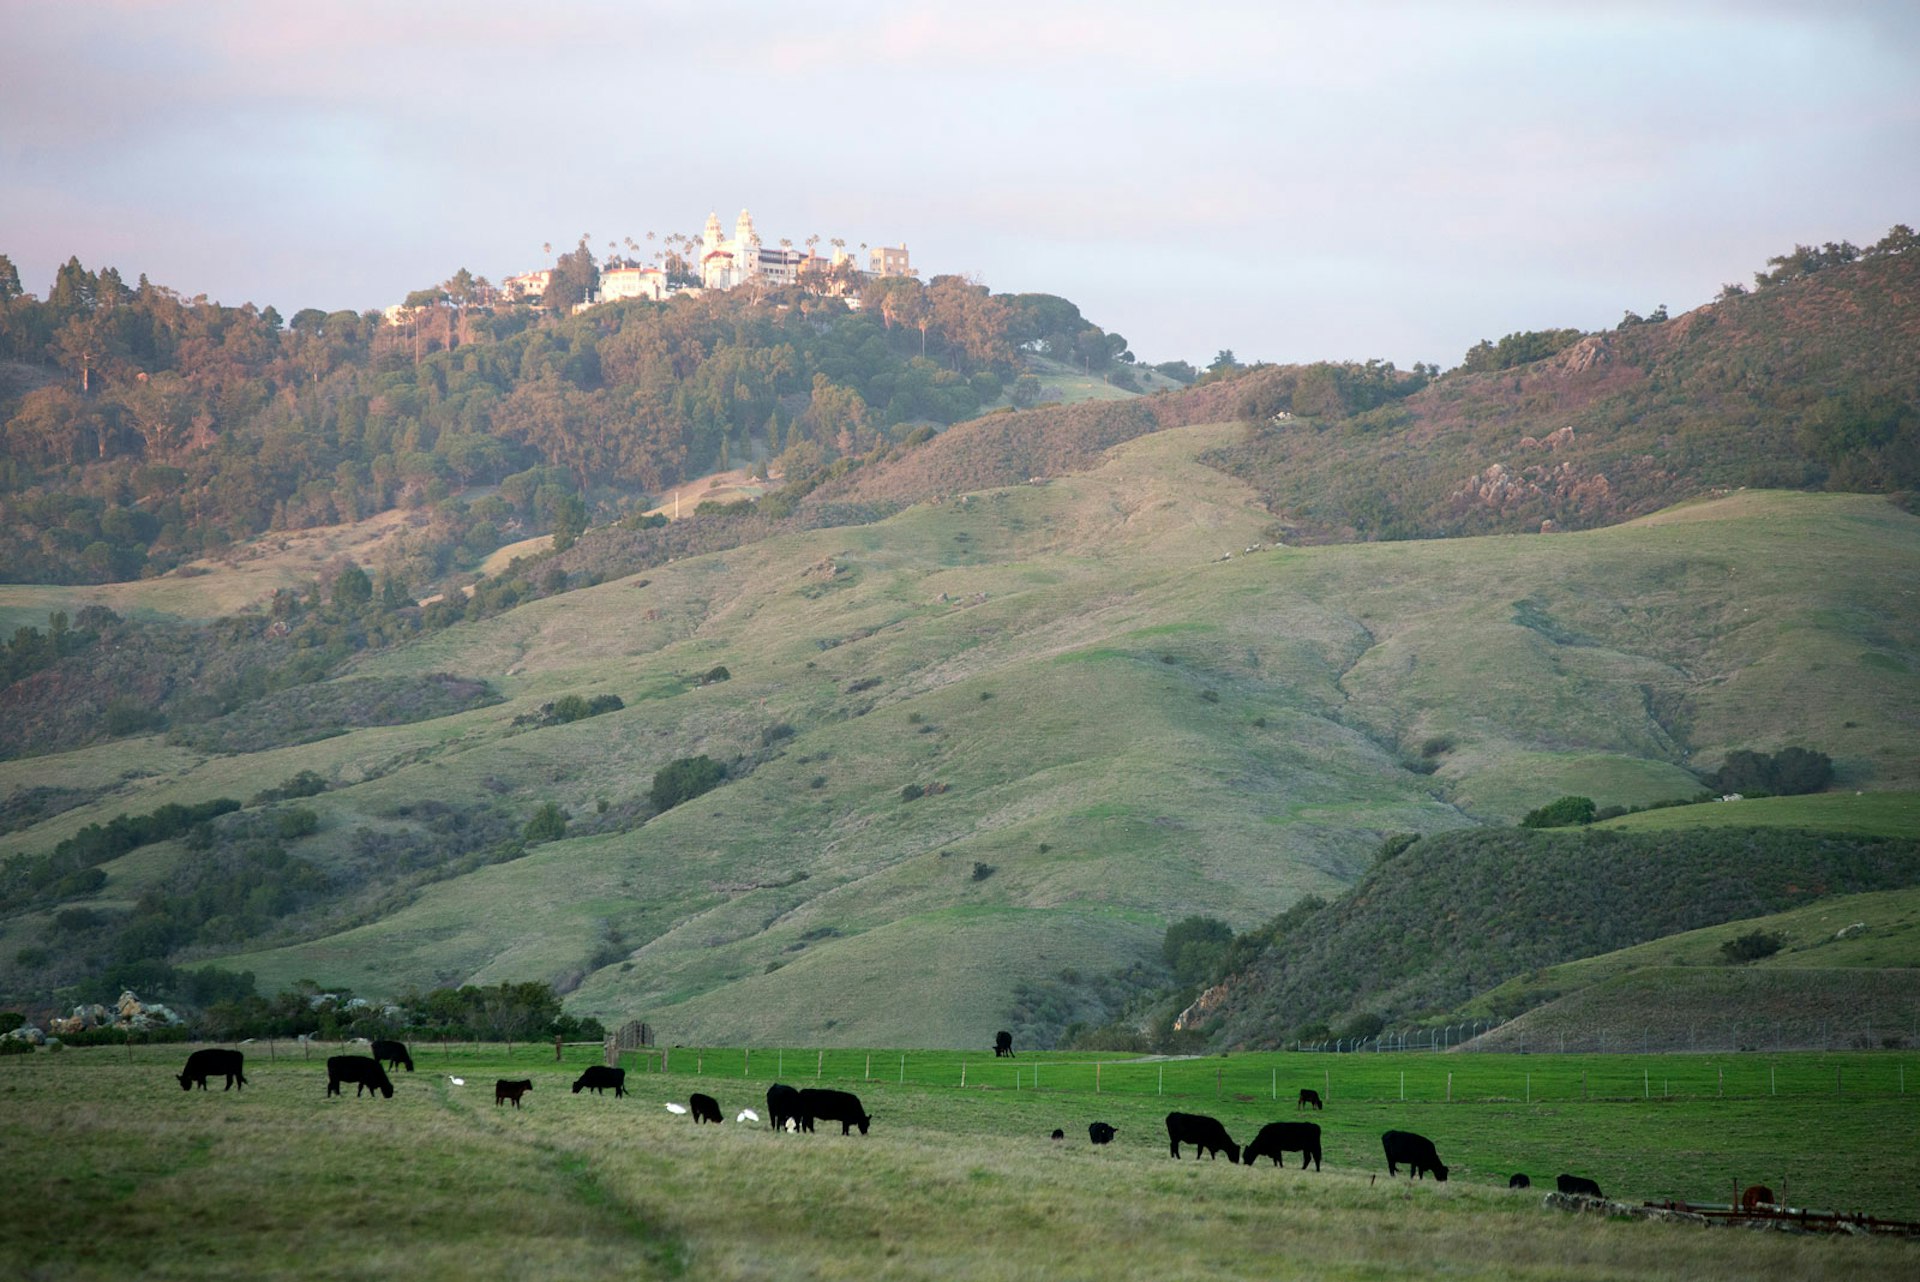 Hearst Castle sits on the top of a grassy hill where cows graze at the base